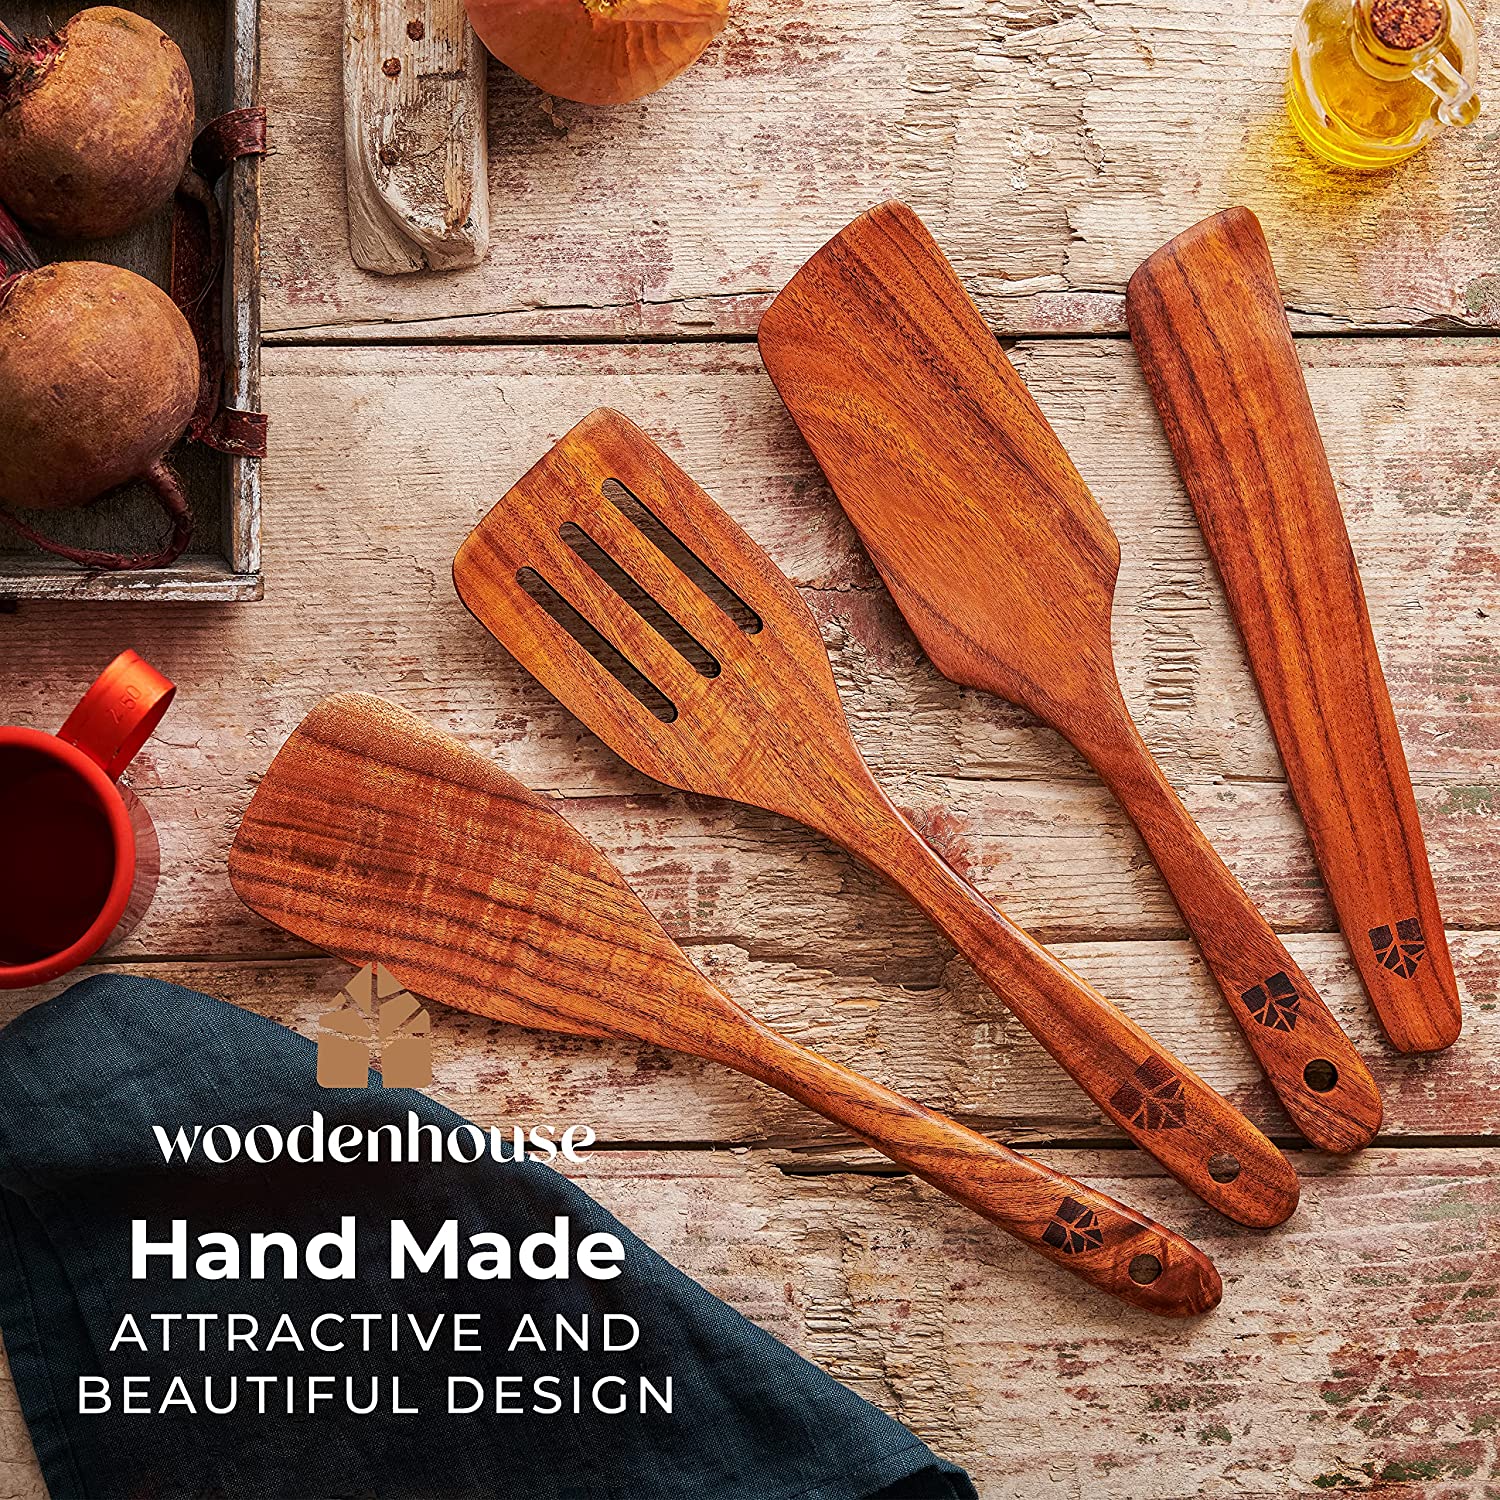 WOODENHOUSE LIFELONG QUALITY Wooden Spatula for cooking, Kitchen Set of 4,  Natural Teak Wooden Utensils including